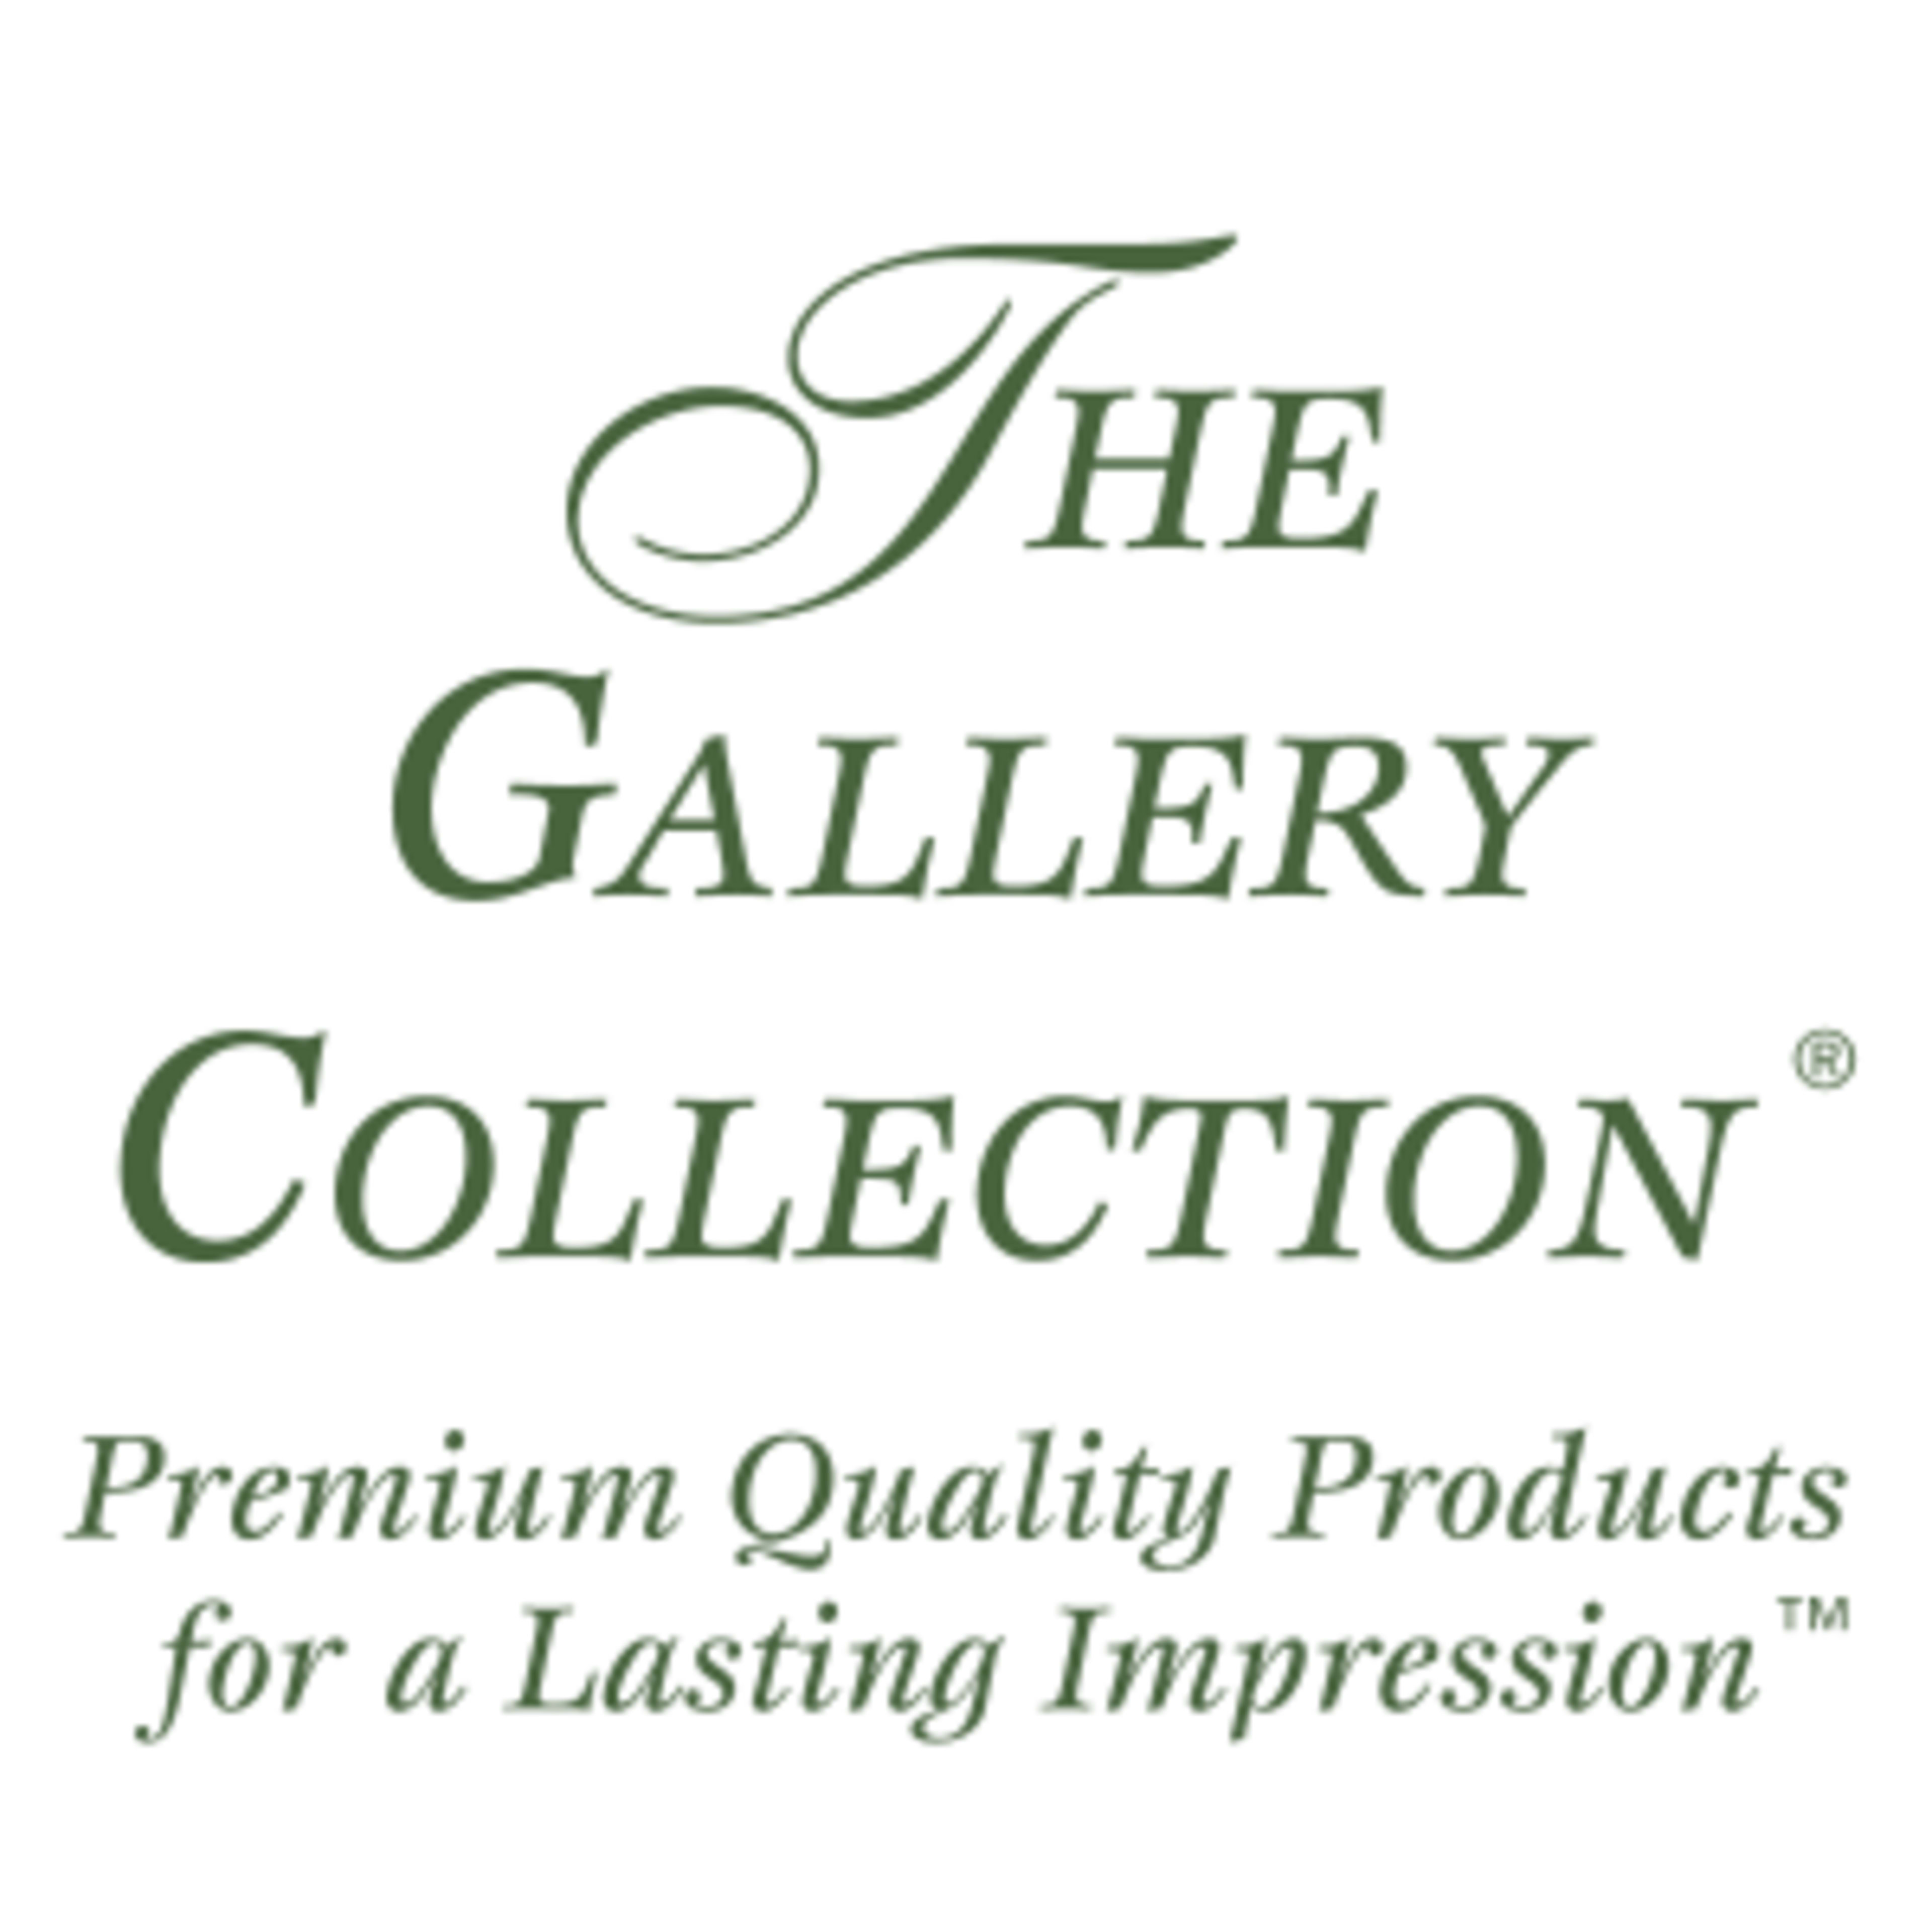 Gallery CollectionCode